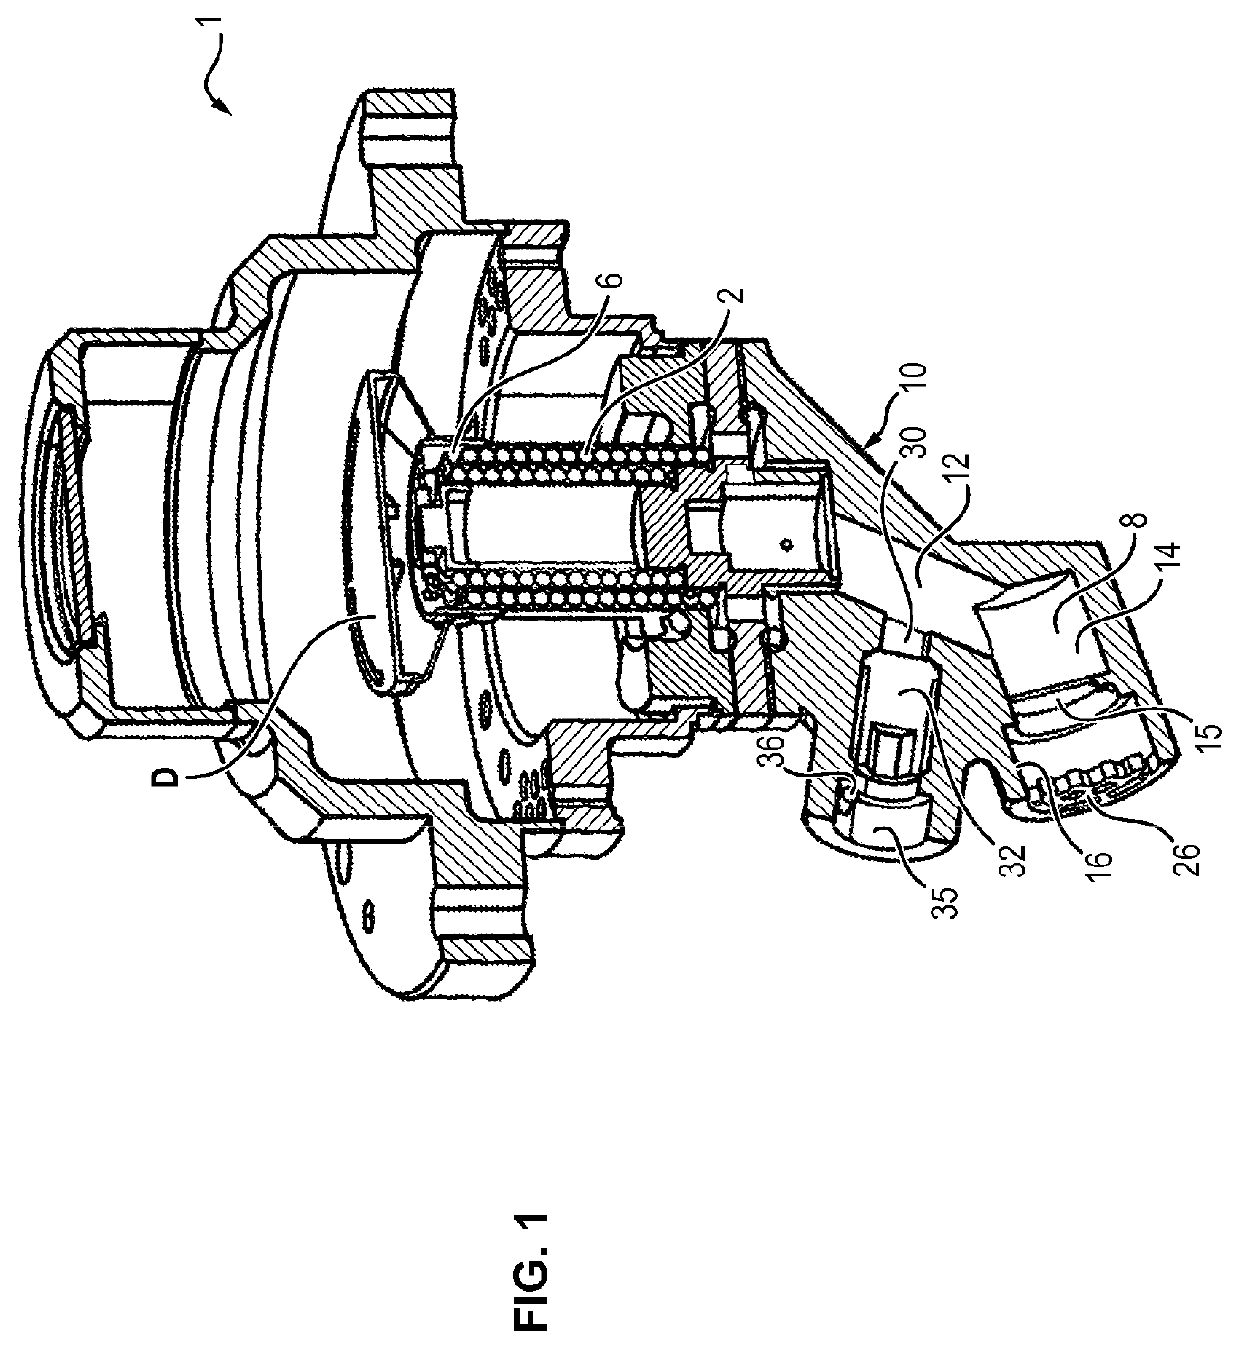 Part for joule-thomson cooler and method for manufacturing such a part